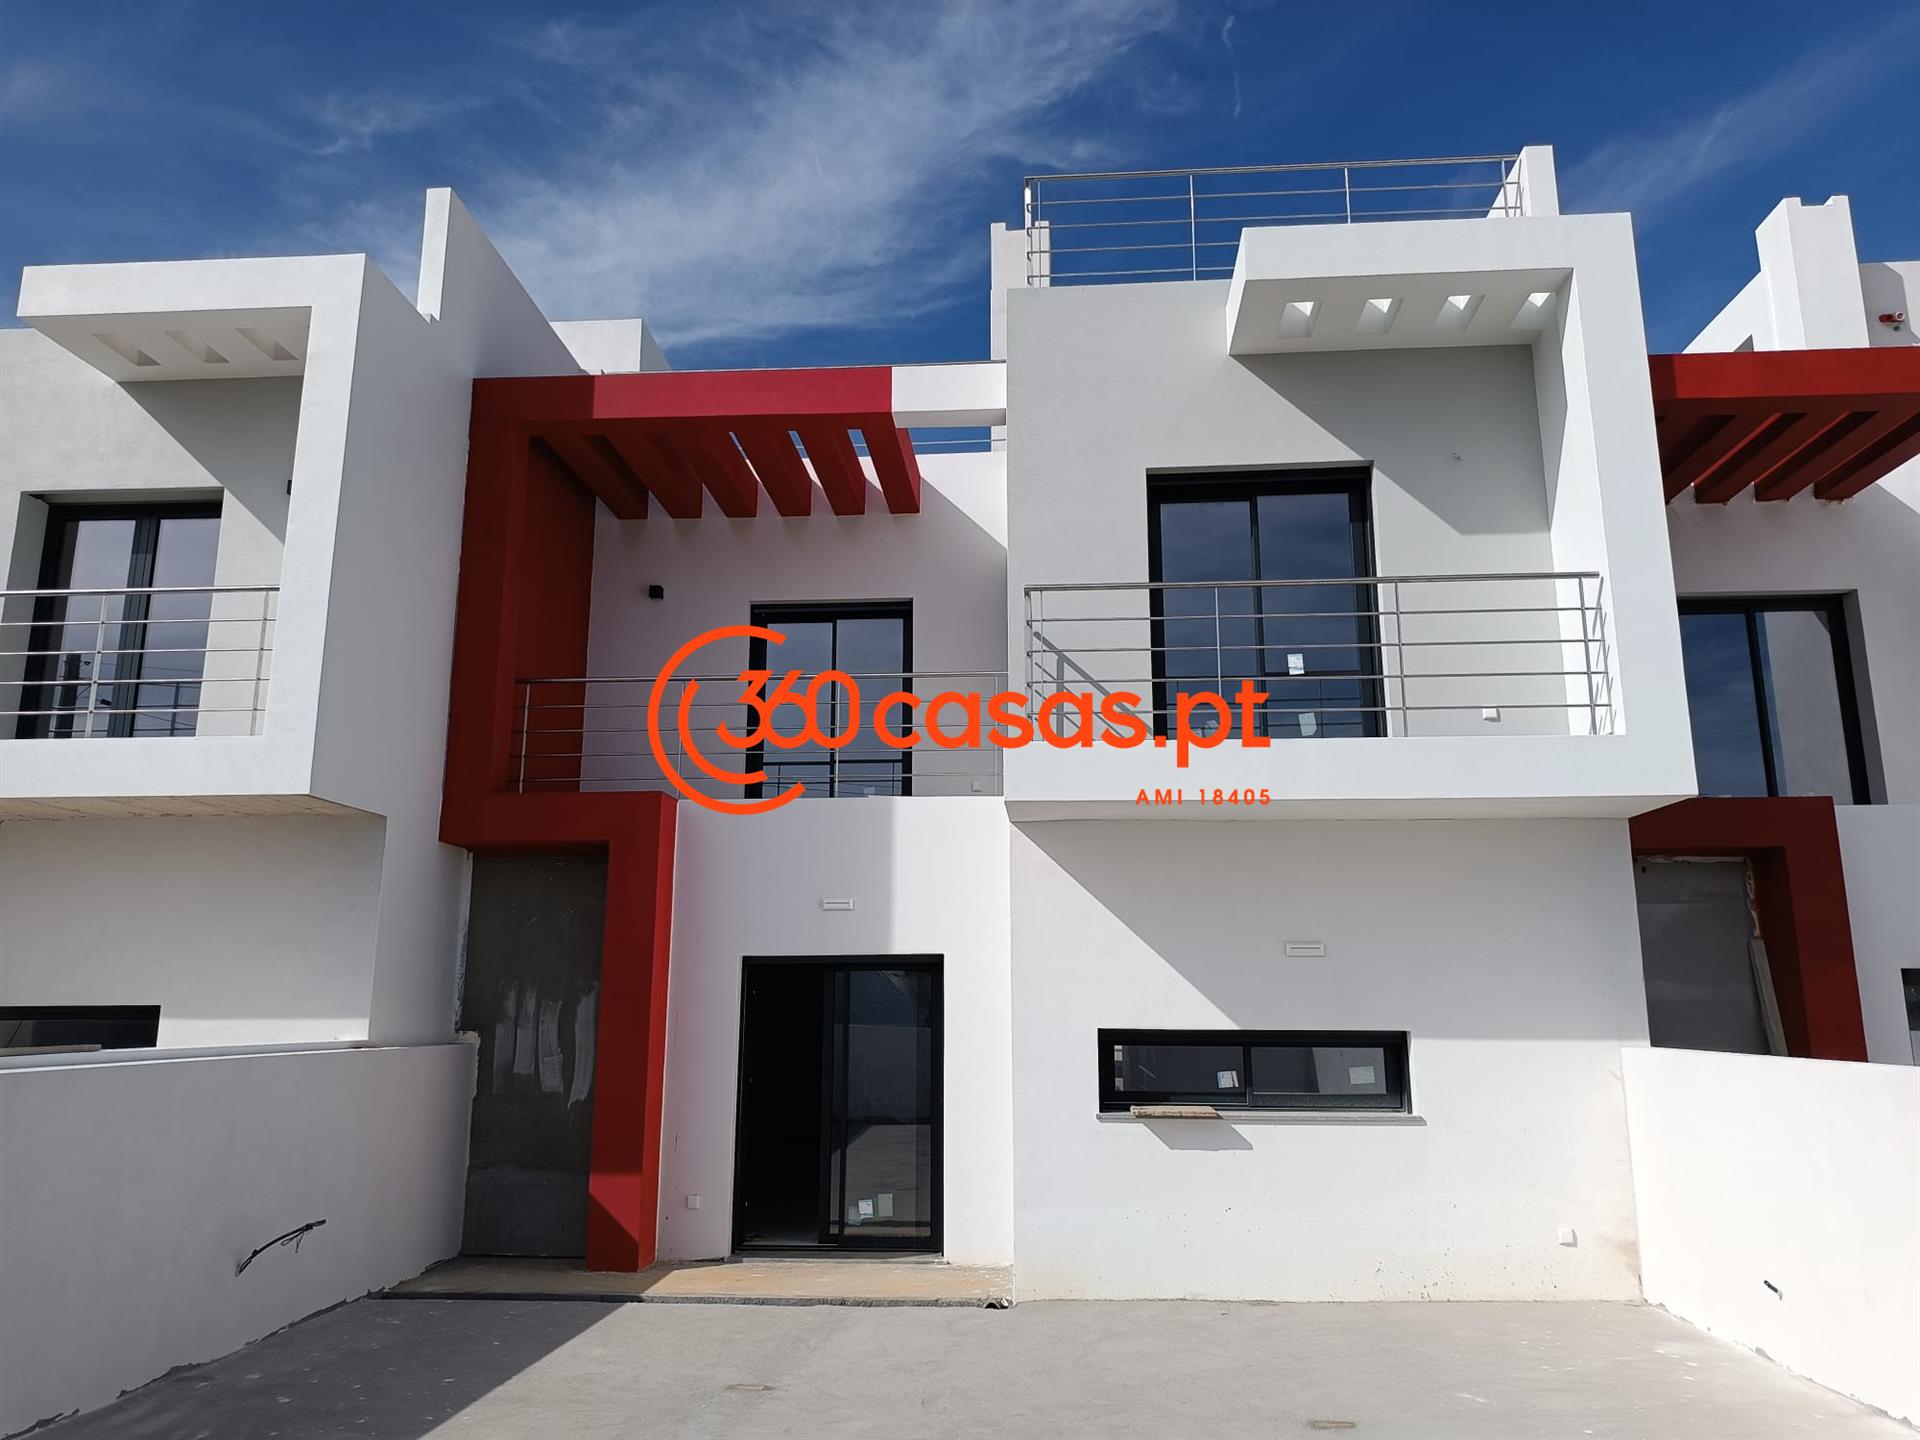 4 bedroom house with parking space, basement and rooftop in Quelfes, Olhão